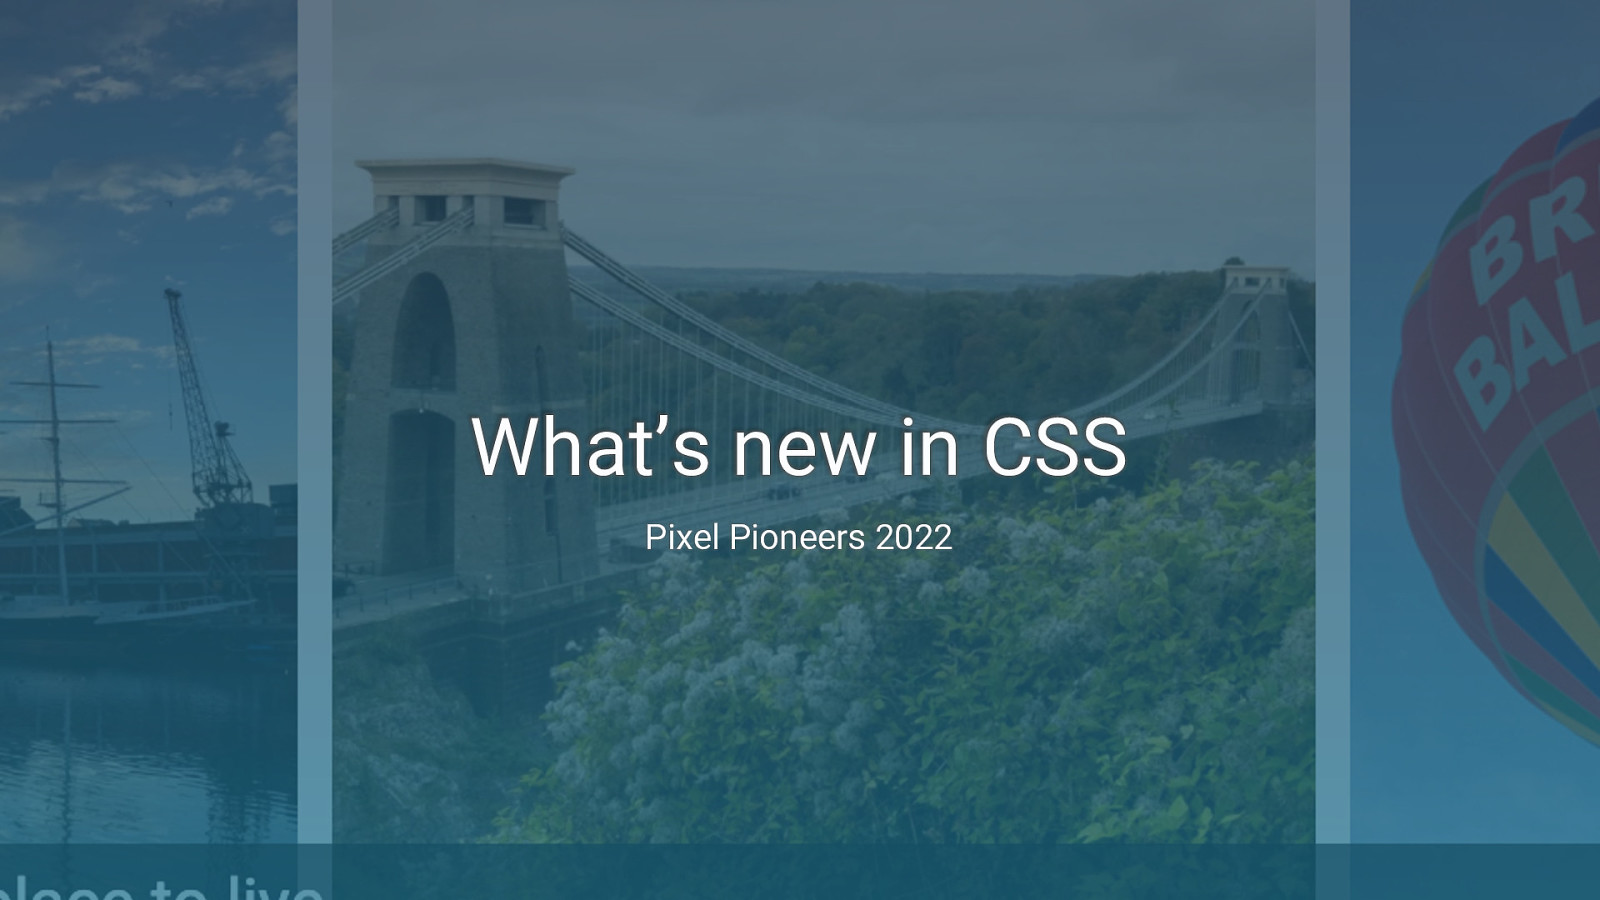 What’s new in CSS?